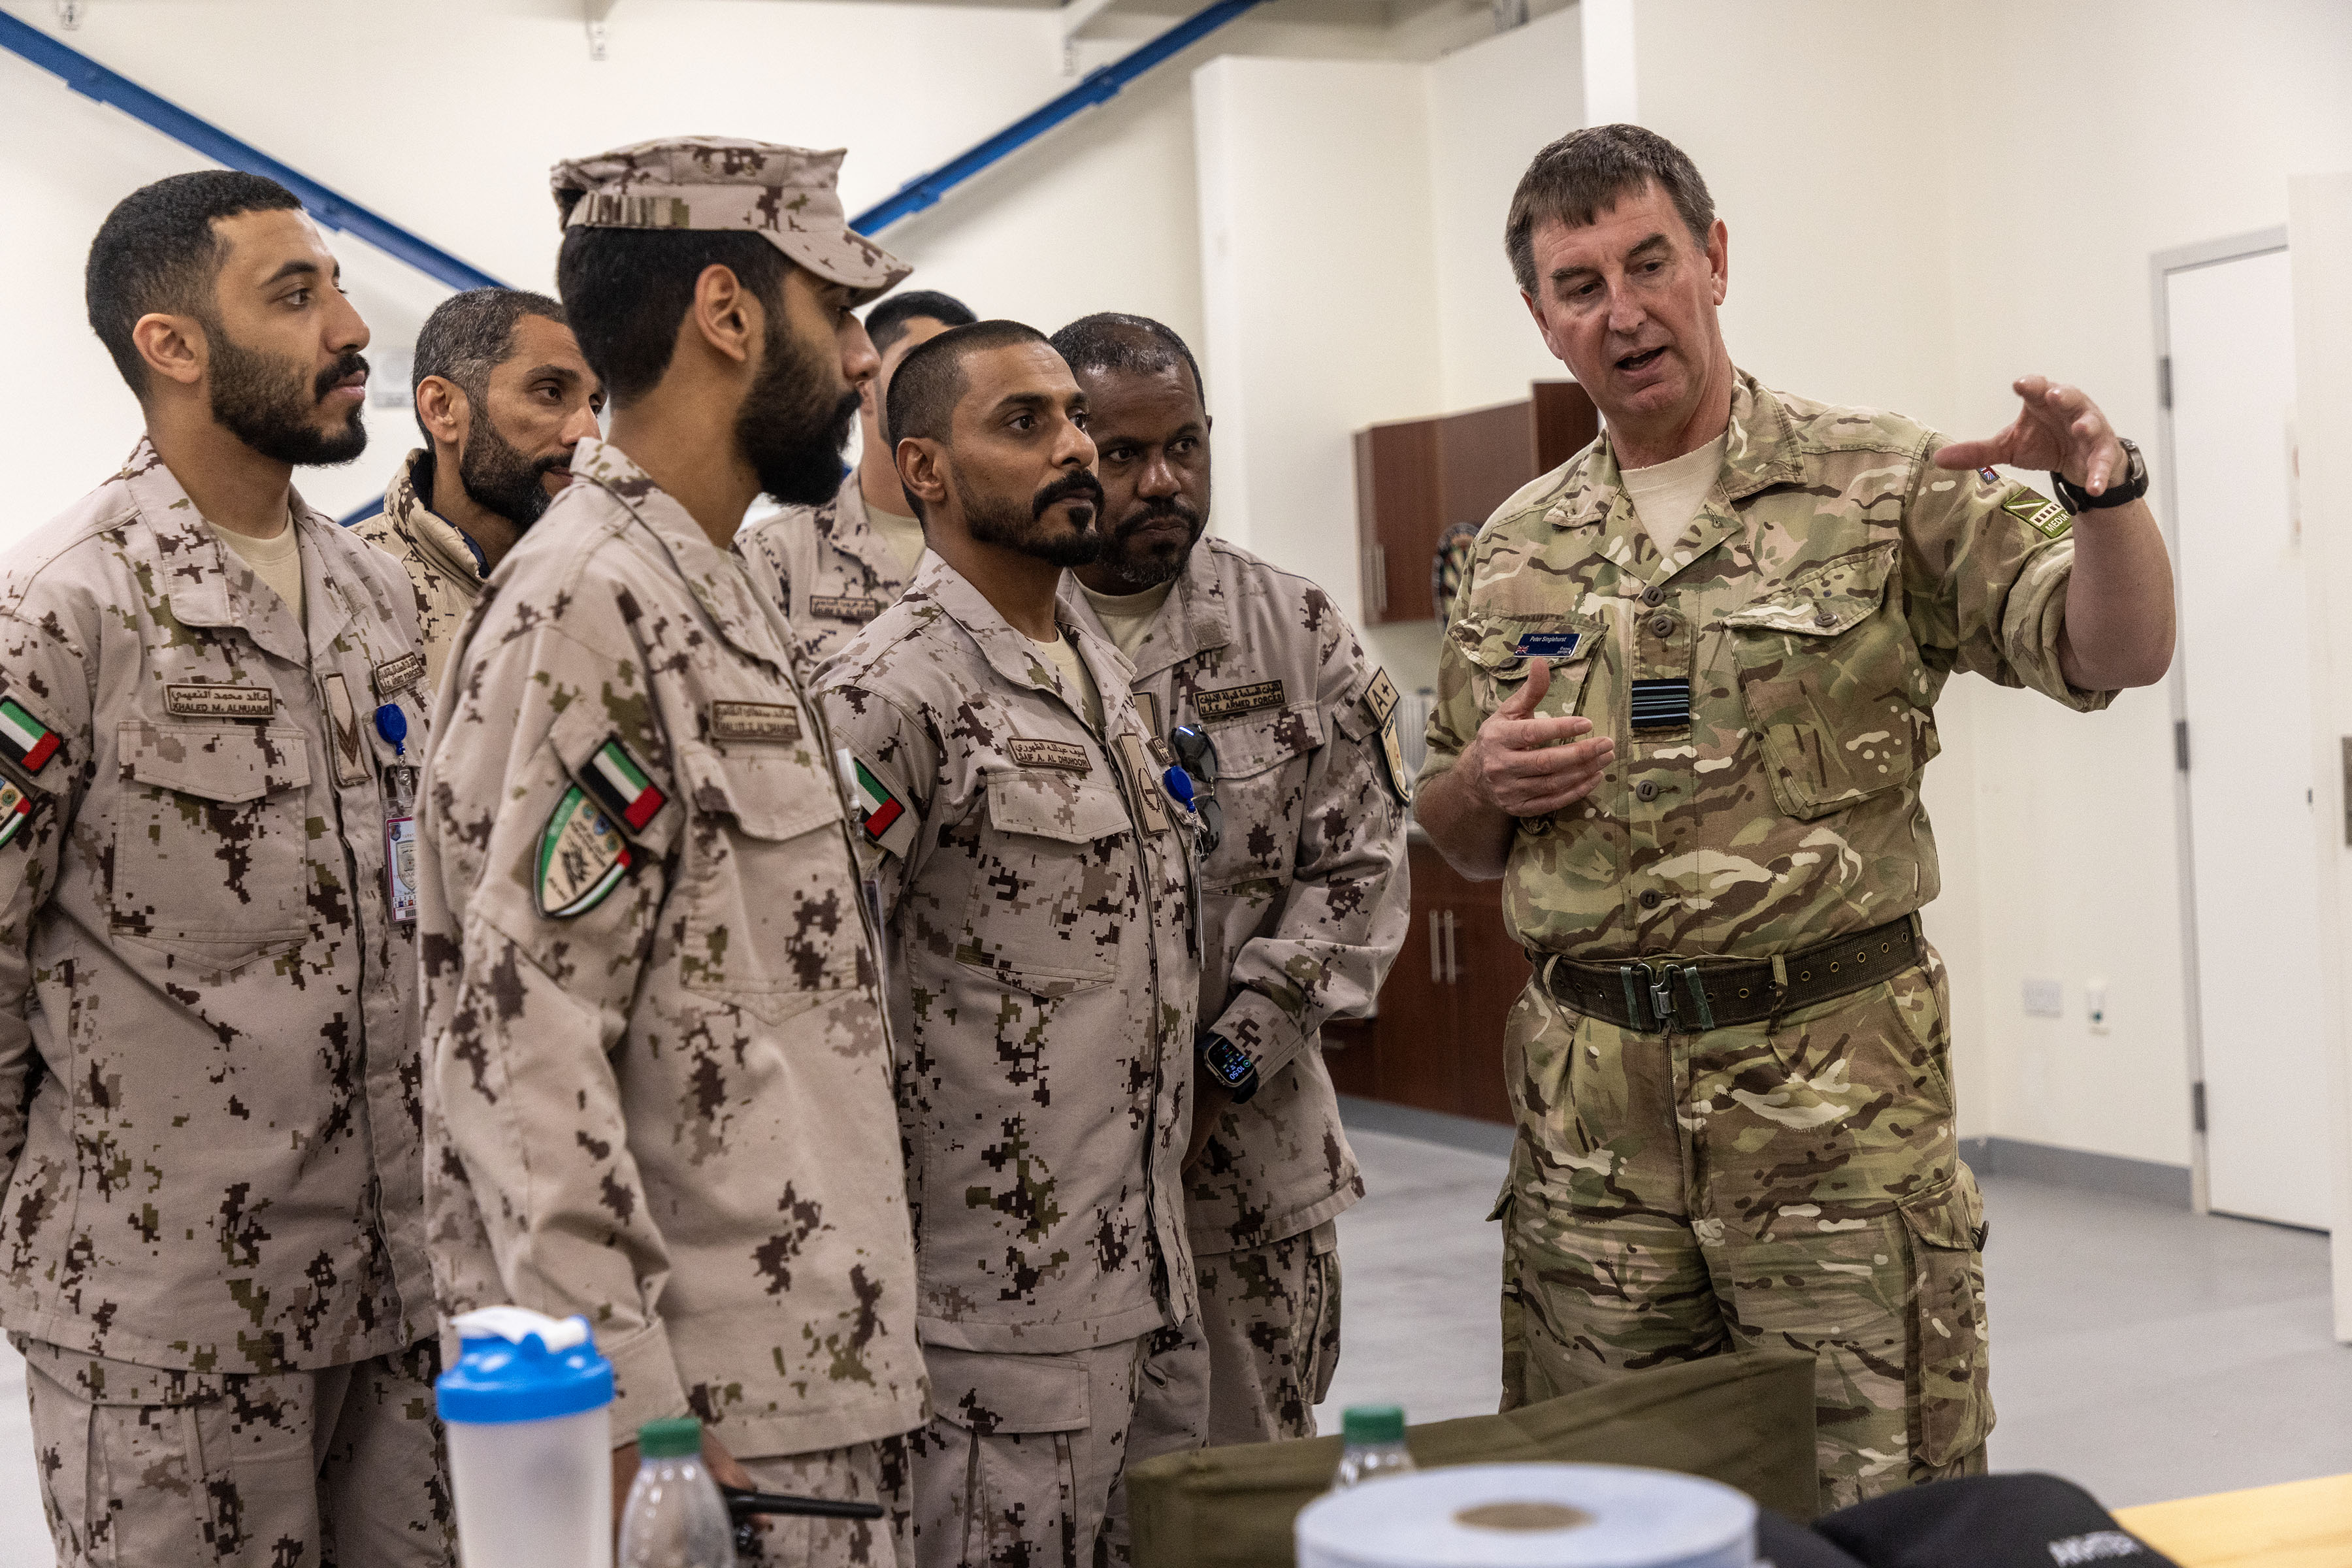 RAF serviceperson speaking to a group of UAE personnel